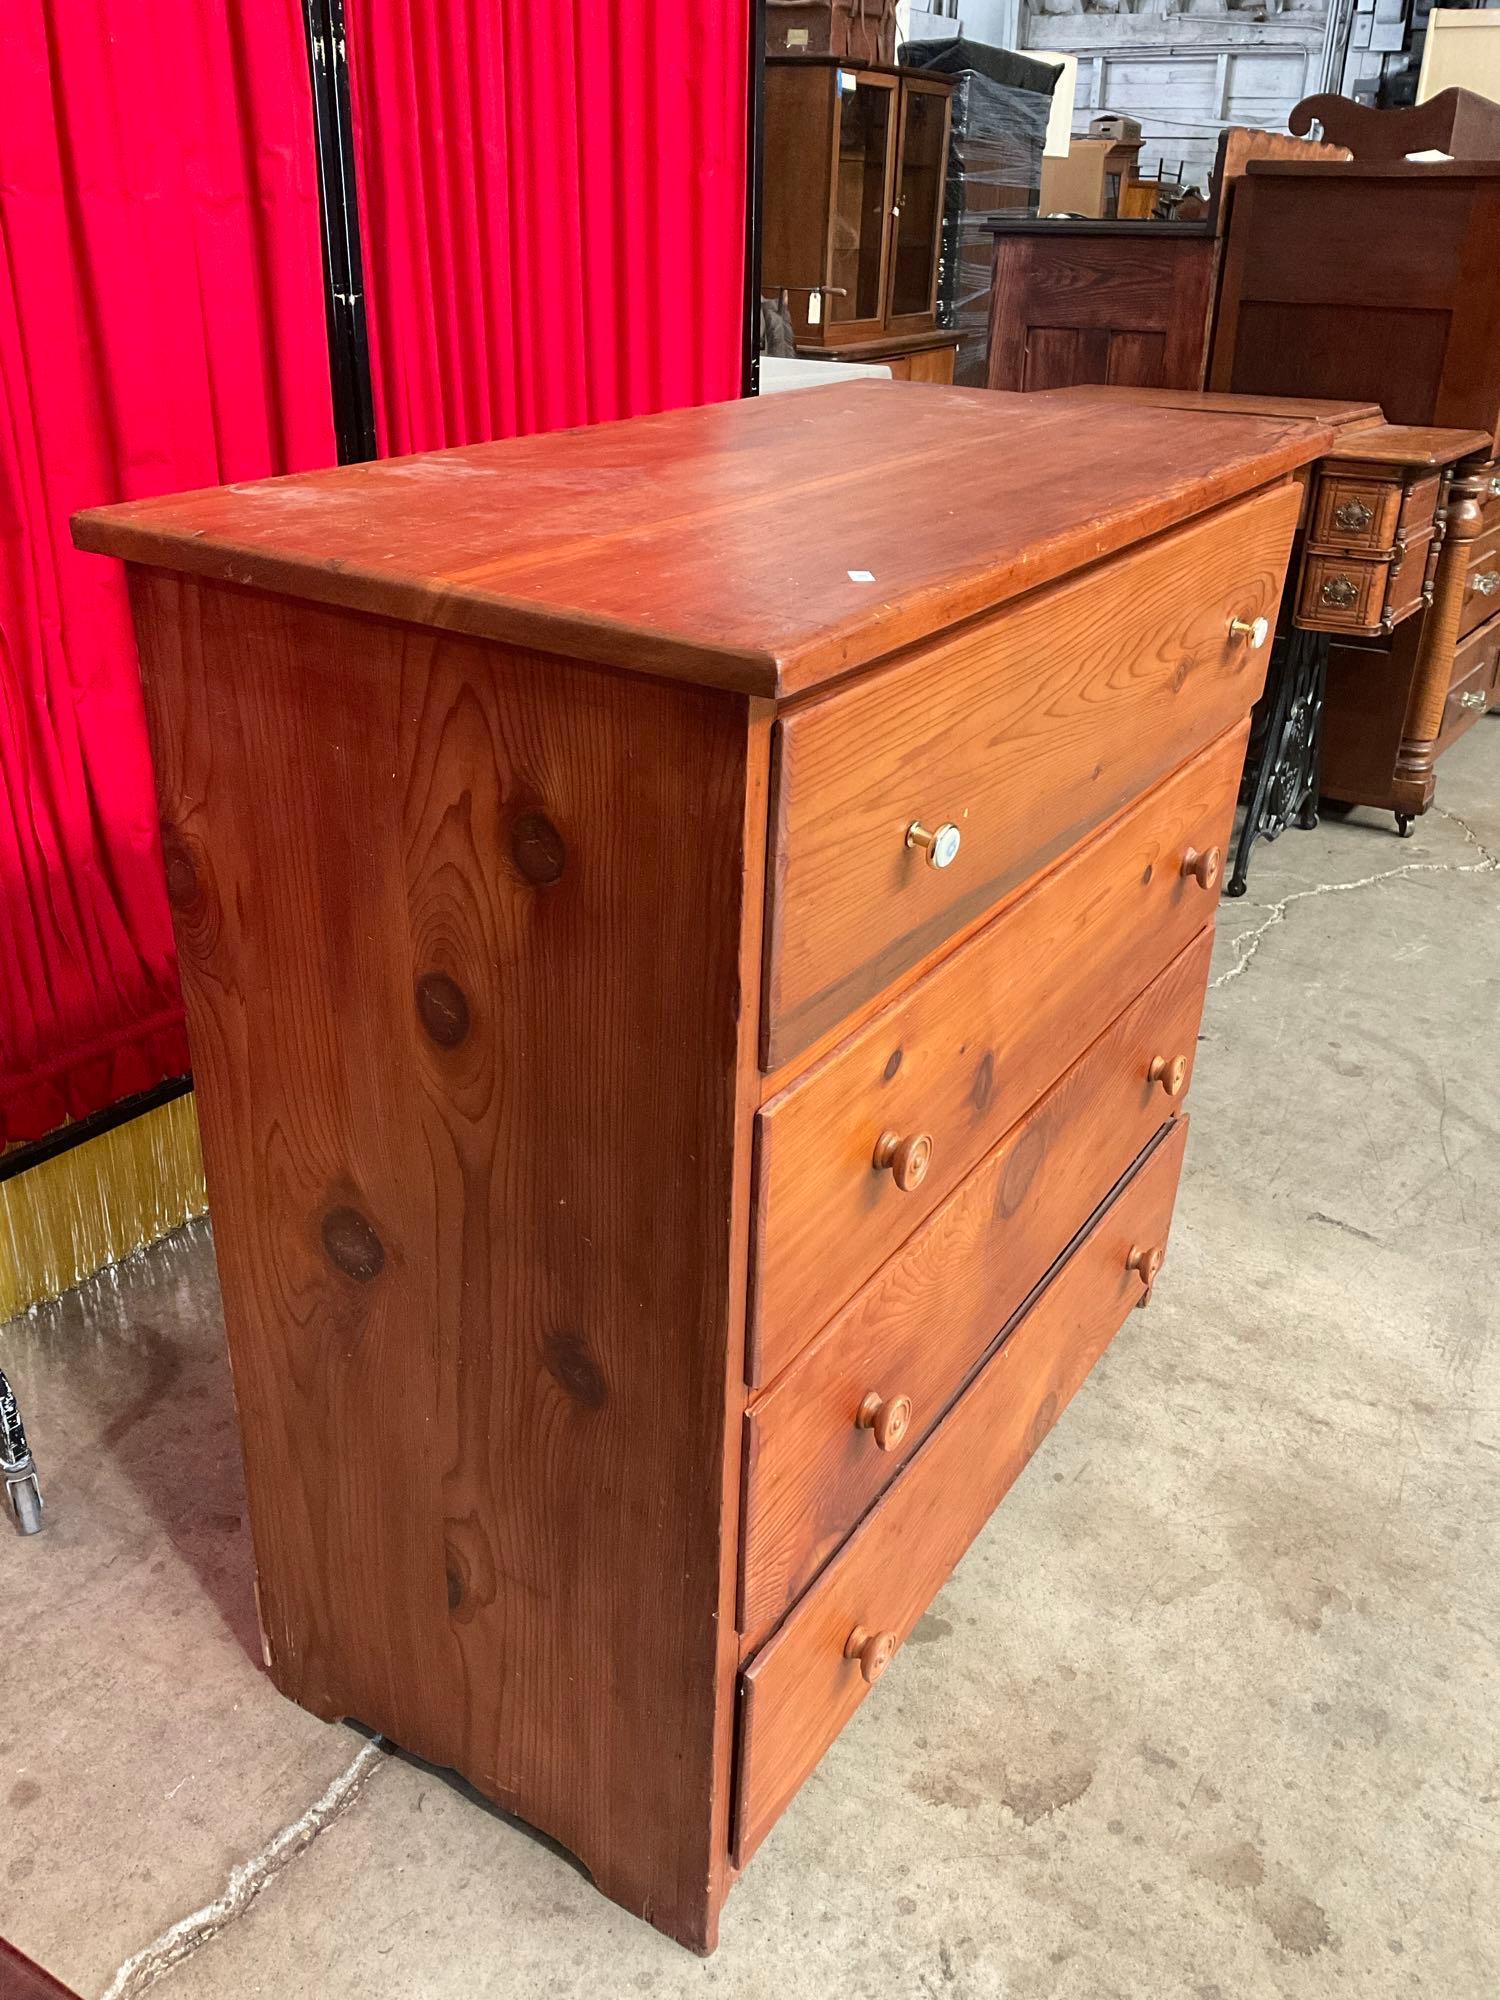 Vintage Wooden Dresser w/ 4 Drawers & Roll Out Writing Surface w/ Letter Compartments. See pics.